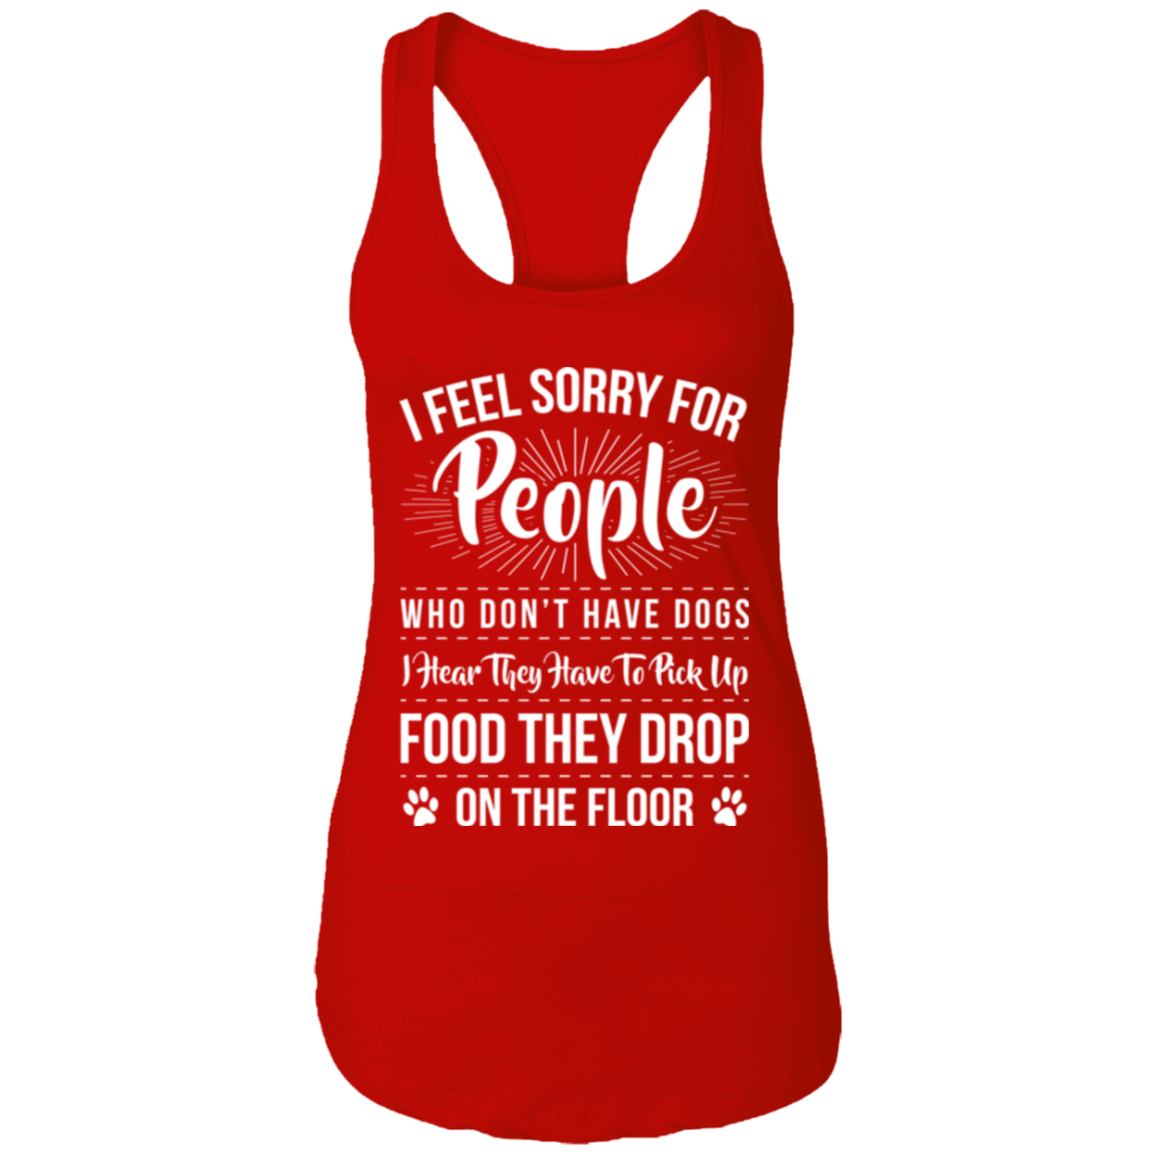 I Feel Sorry For People - Ladies Racer Back Tank.